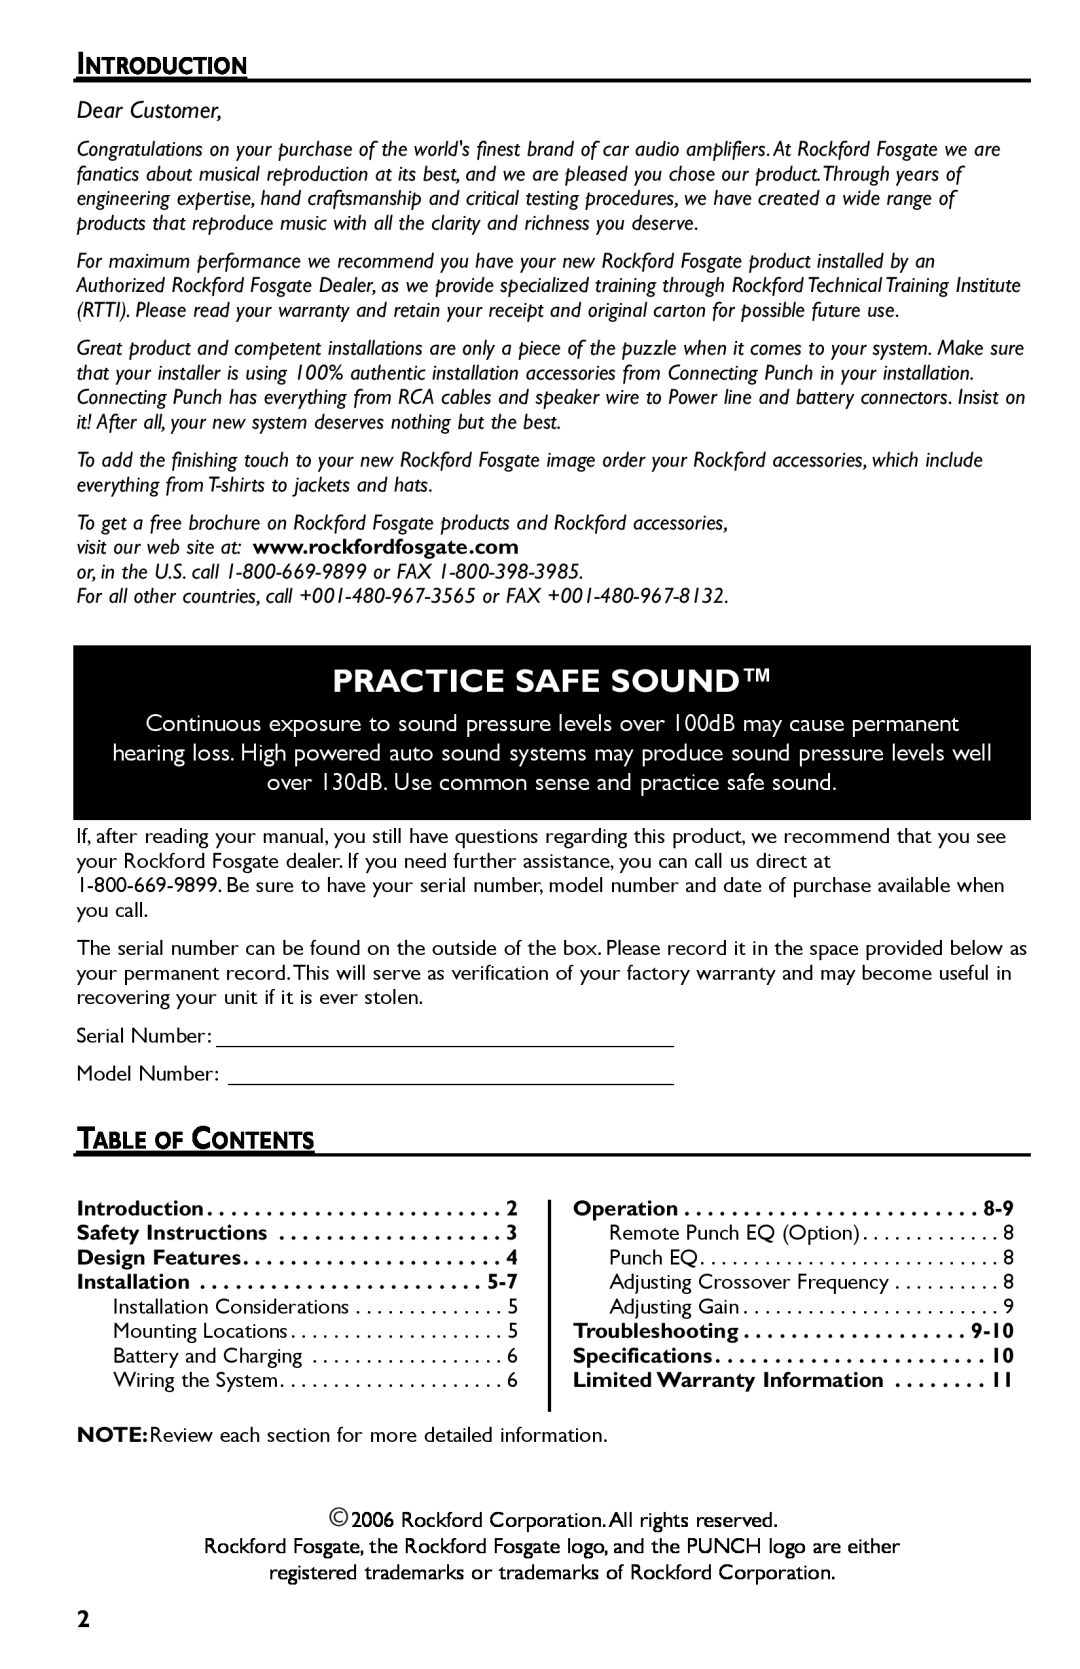 Rockford Fosgate T600-2, T400-2 manual Practice Safe Sound, Introduction, Table Of Contents 